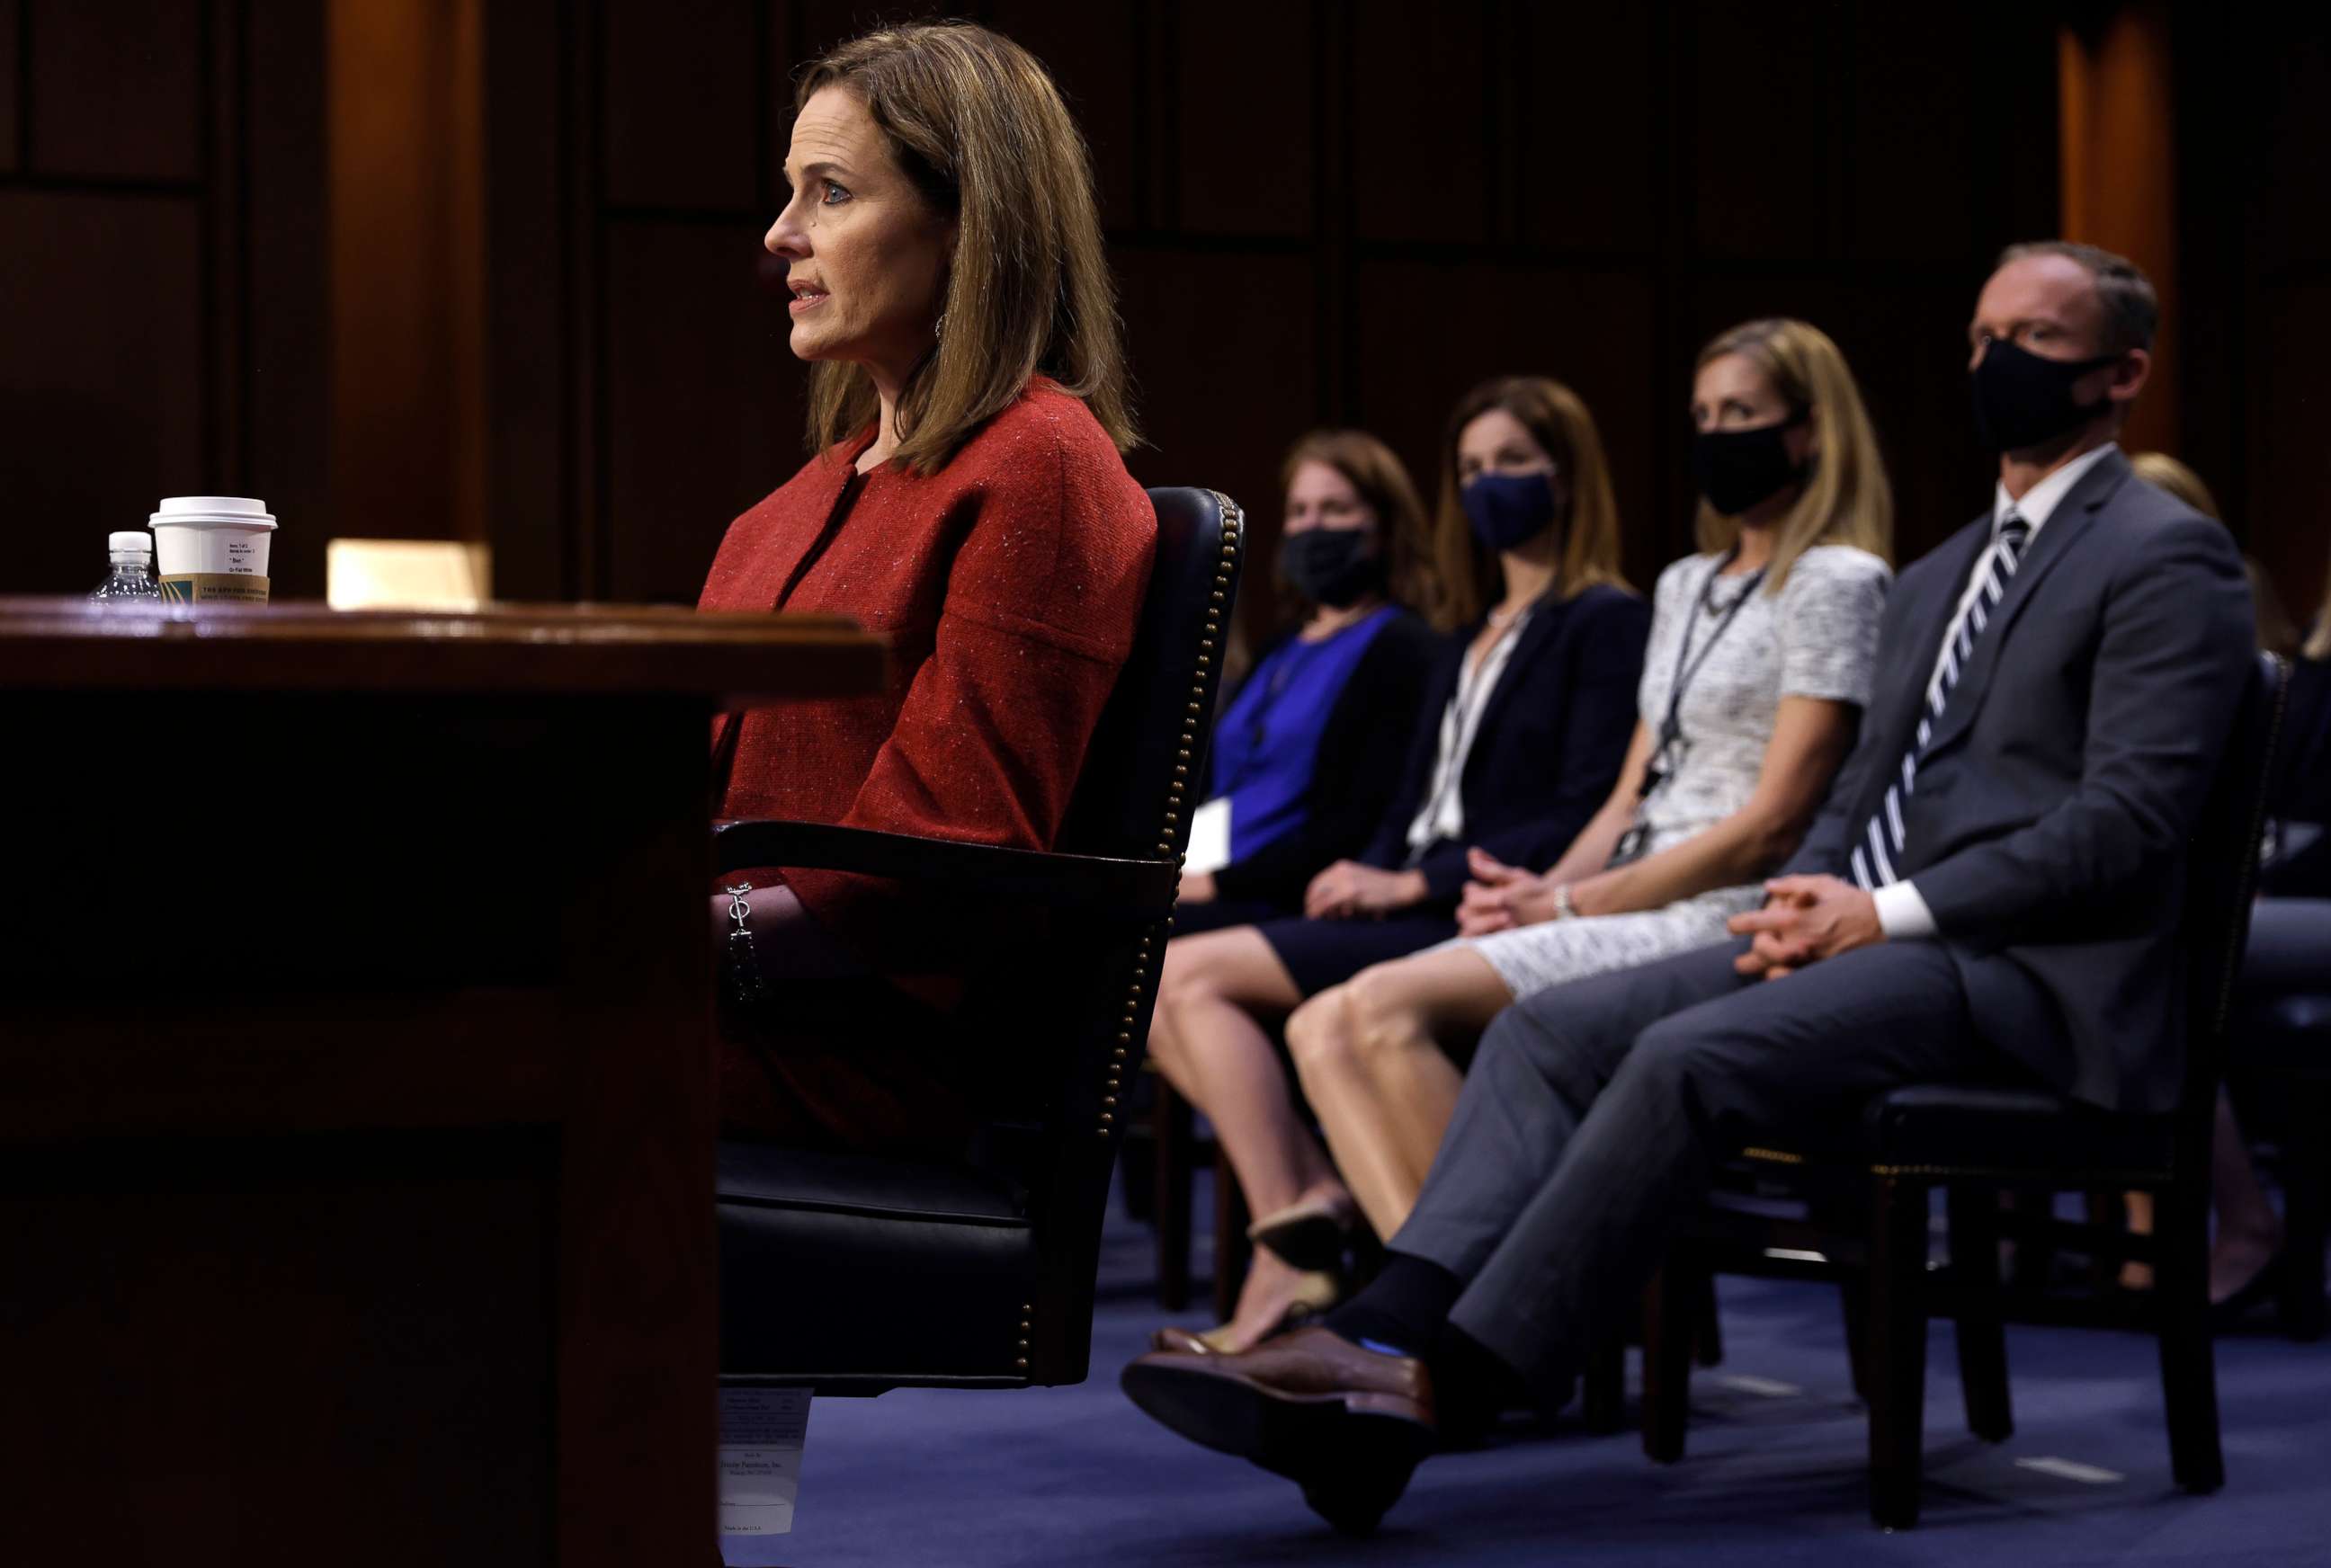 PHOTO: Supreme Court nominee Judge Amy Coney Barrett testifies before the Senate Judiciary Committee on the second day of her Supreme Court confirmation hearing on Capitol Hill on Oct. 13, 2020 in Washington, DC.